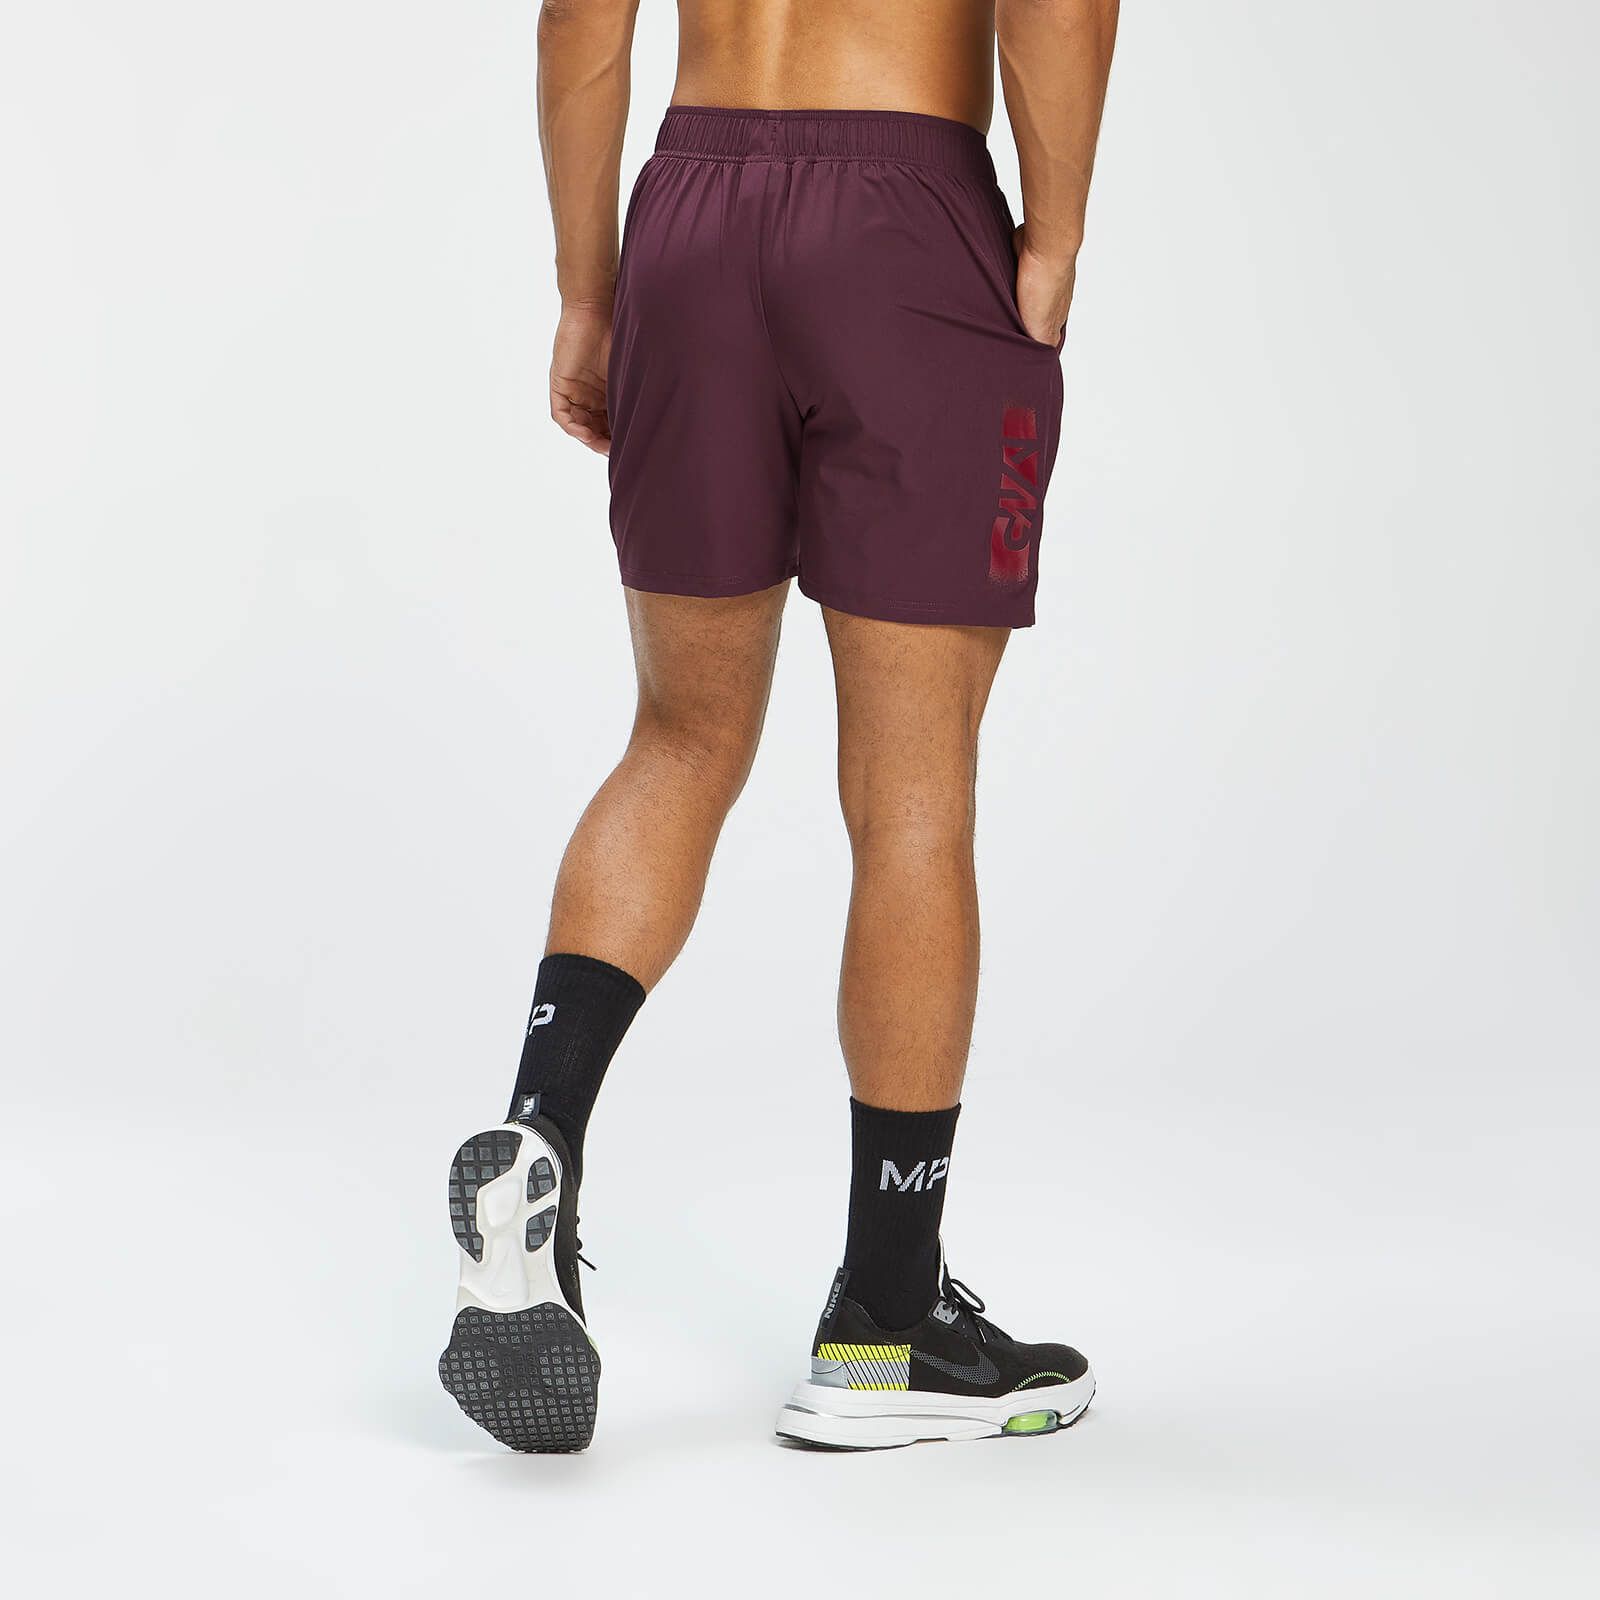 Complete your workout wardrobe with our Graphic Training pieces. Designed for the gym floor, they offer everything you need for everyday sessions. The Graphic Training Shorts are a gym essential, and feature a grown on elasticated waistband with branded drawercords for comfort, and a graphic print and MP logo. Side seam pockets keep your valuables safe whilst you train.